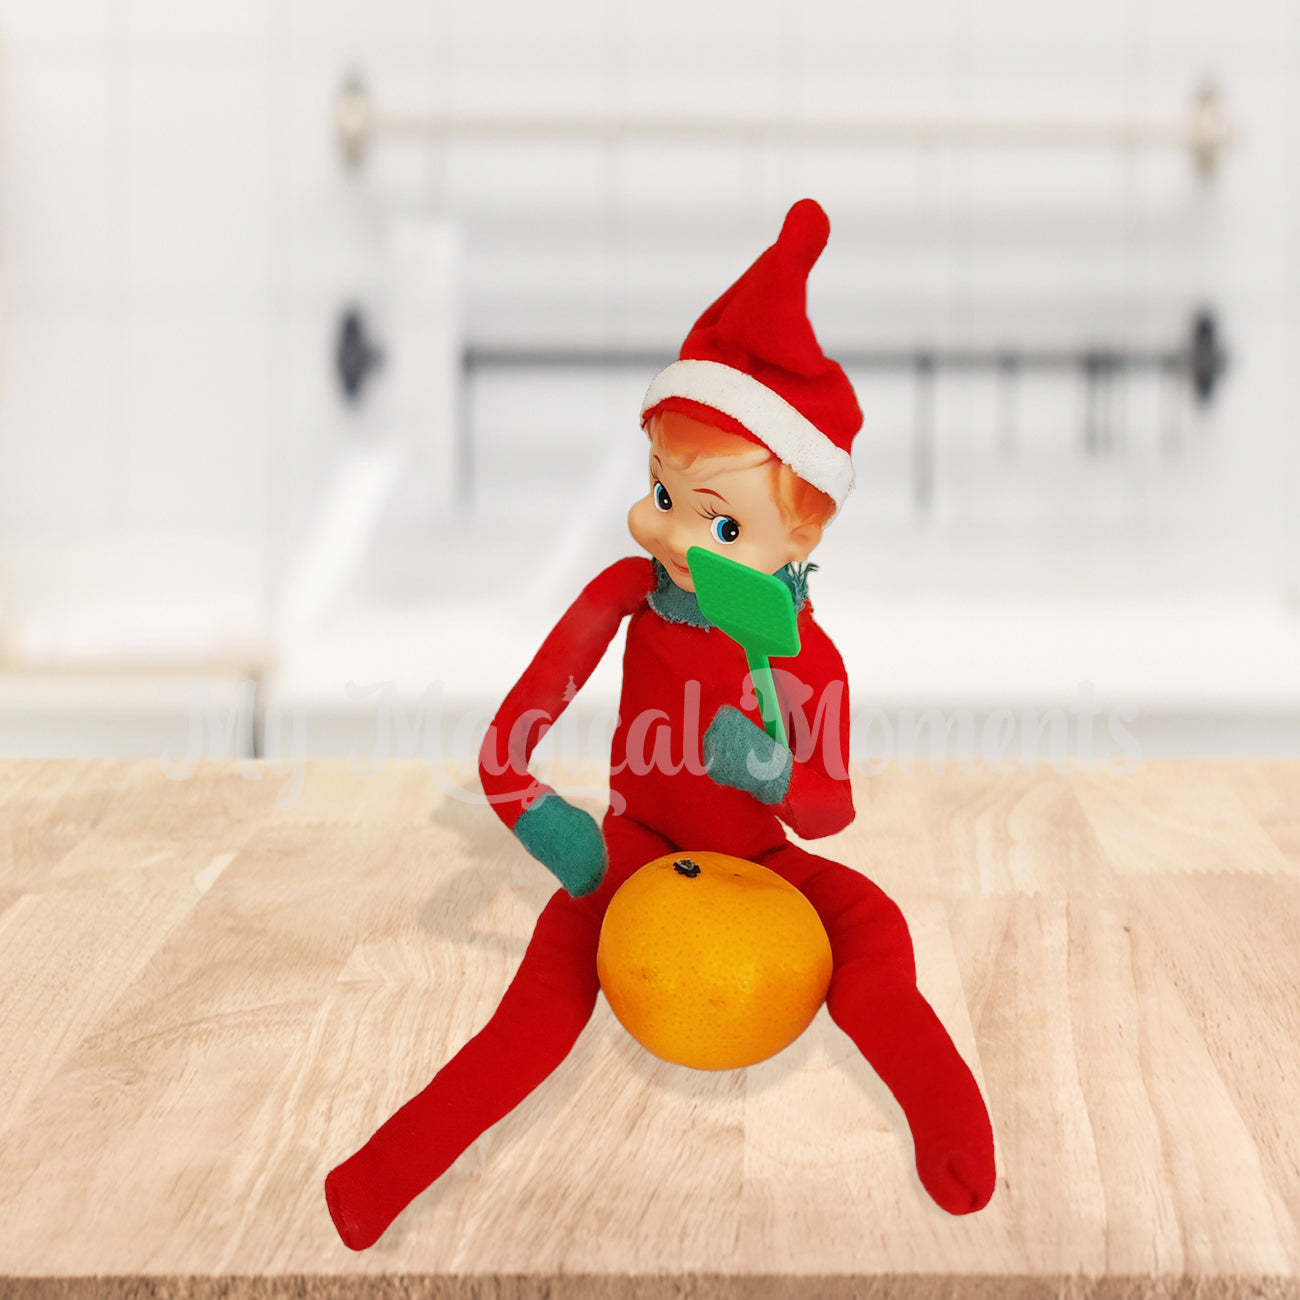 Fly Swatter prop scene in the kitchen on fruit featuring 60s elf by My Magical Moments